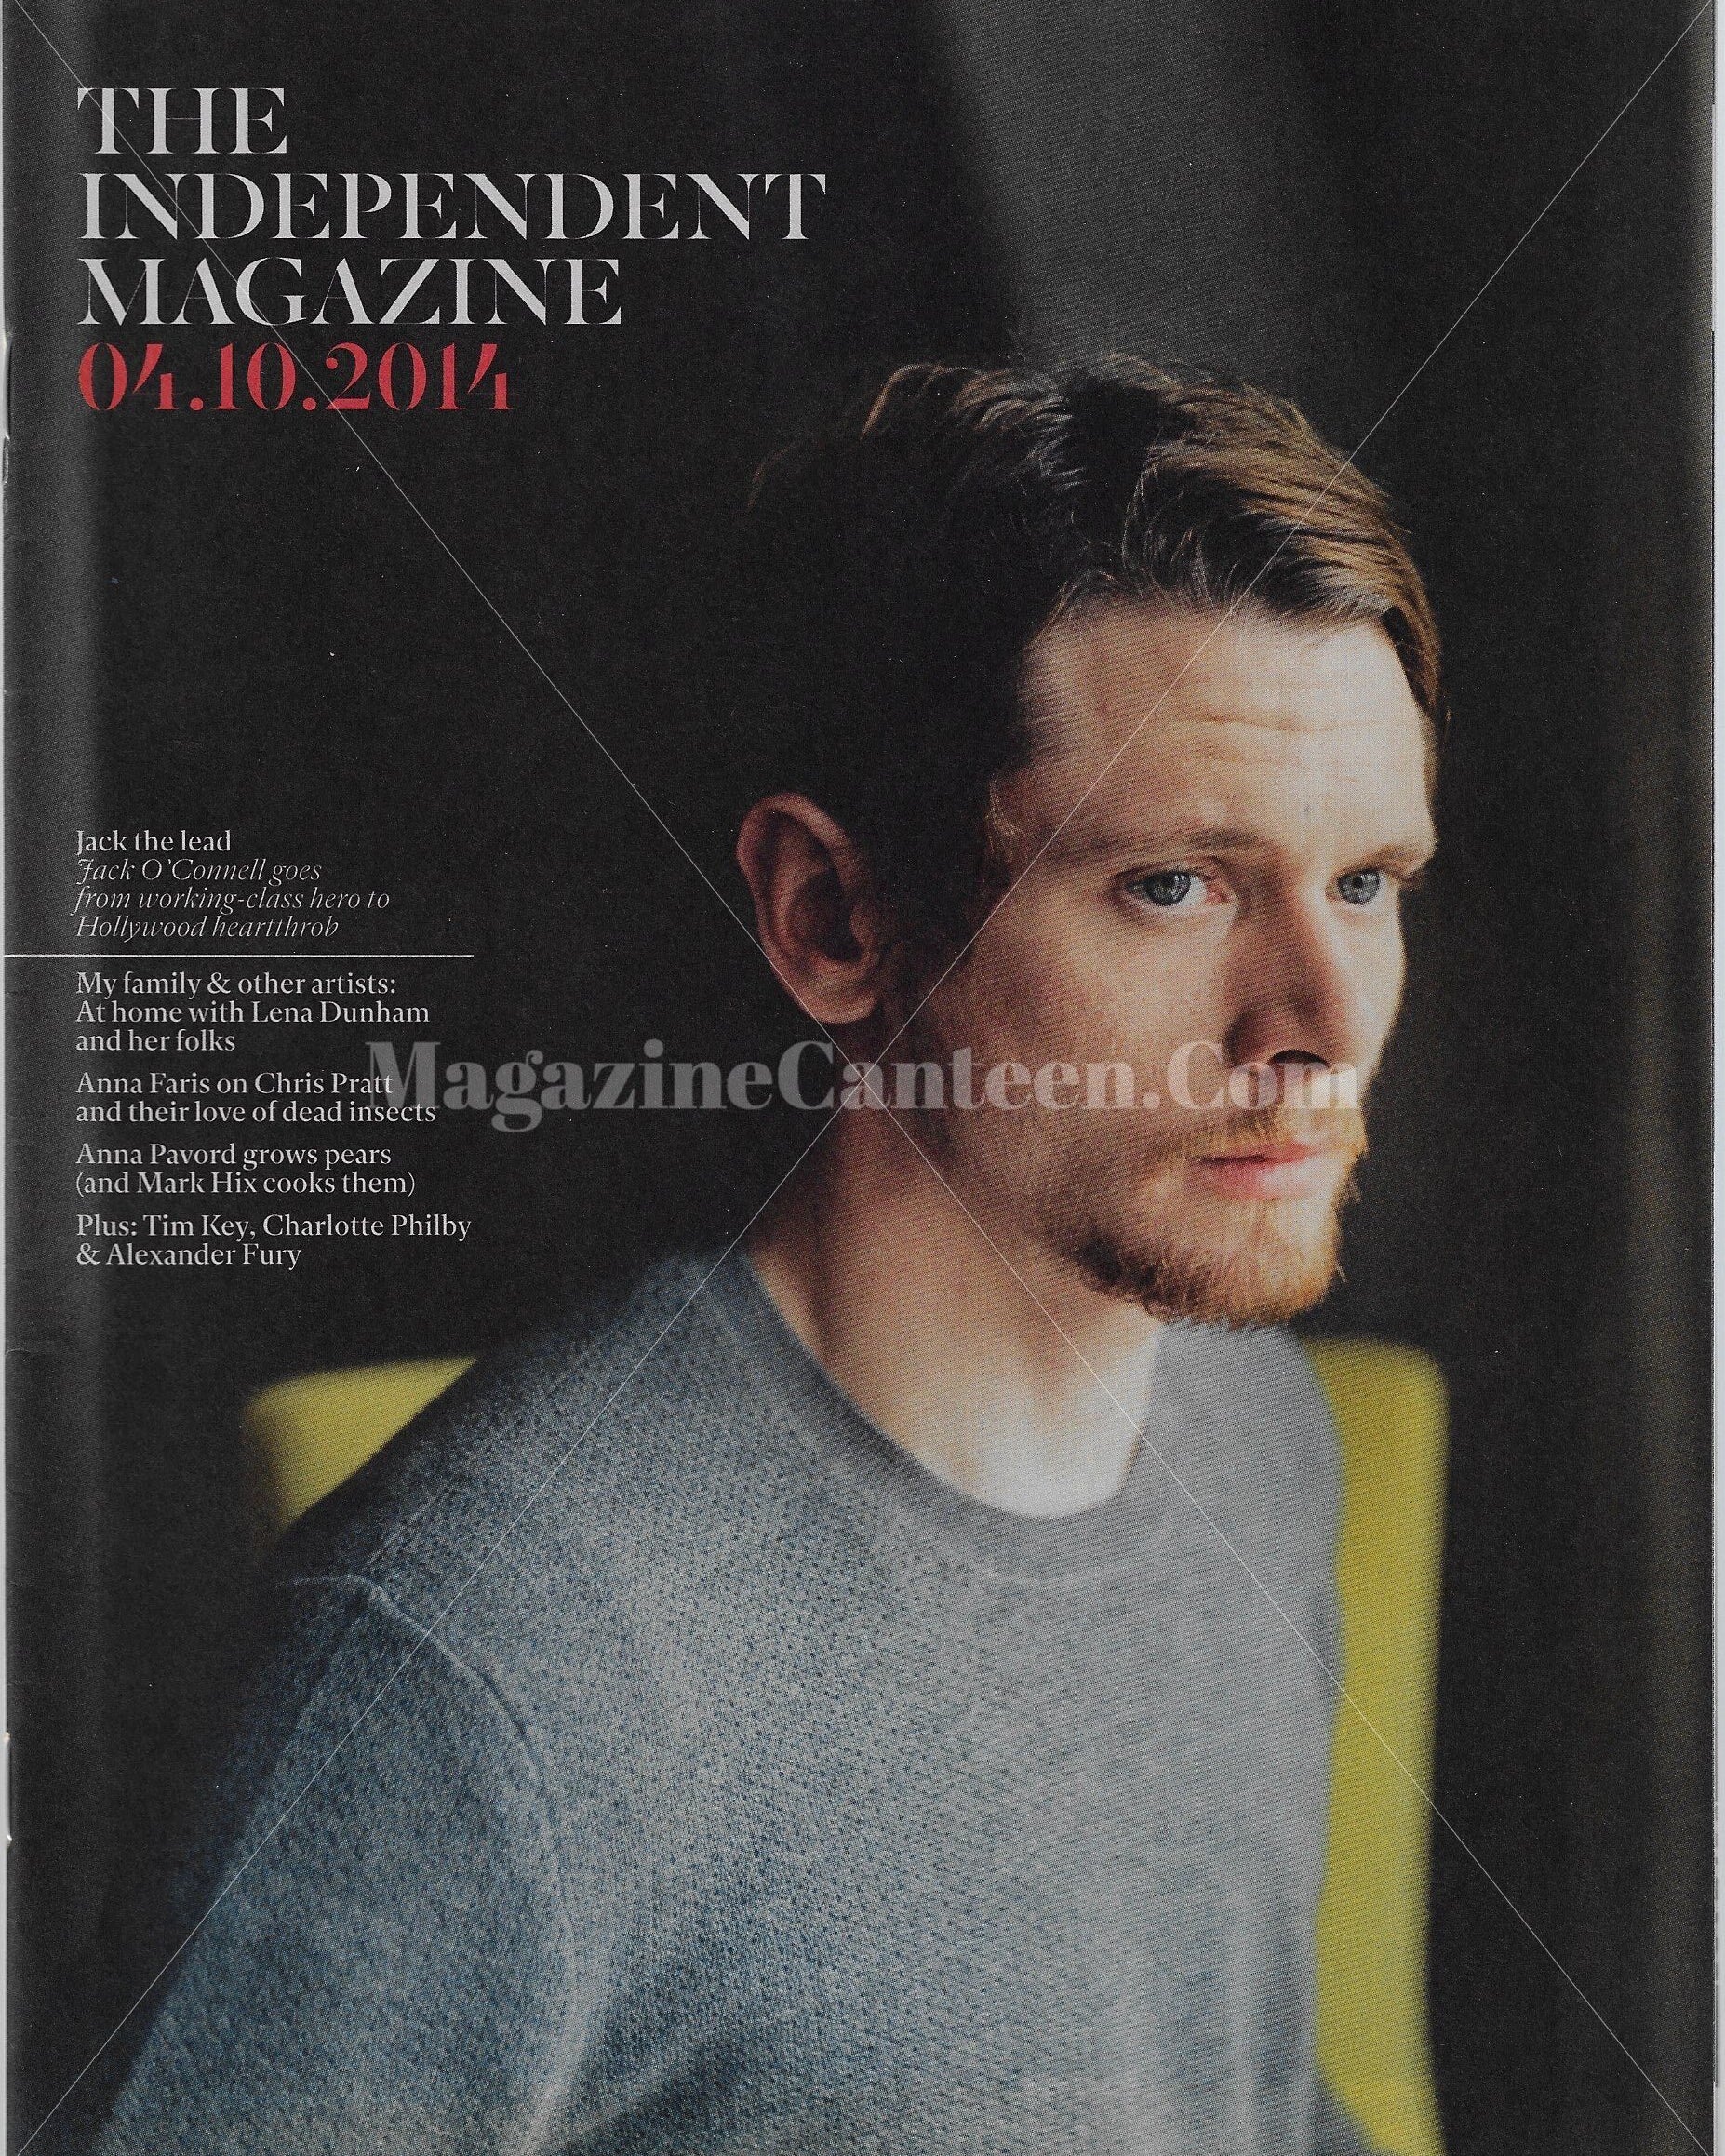 The Independent Magazine - Jack O'Connell